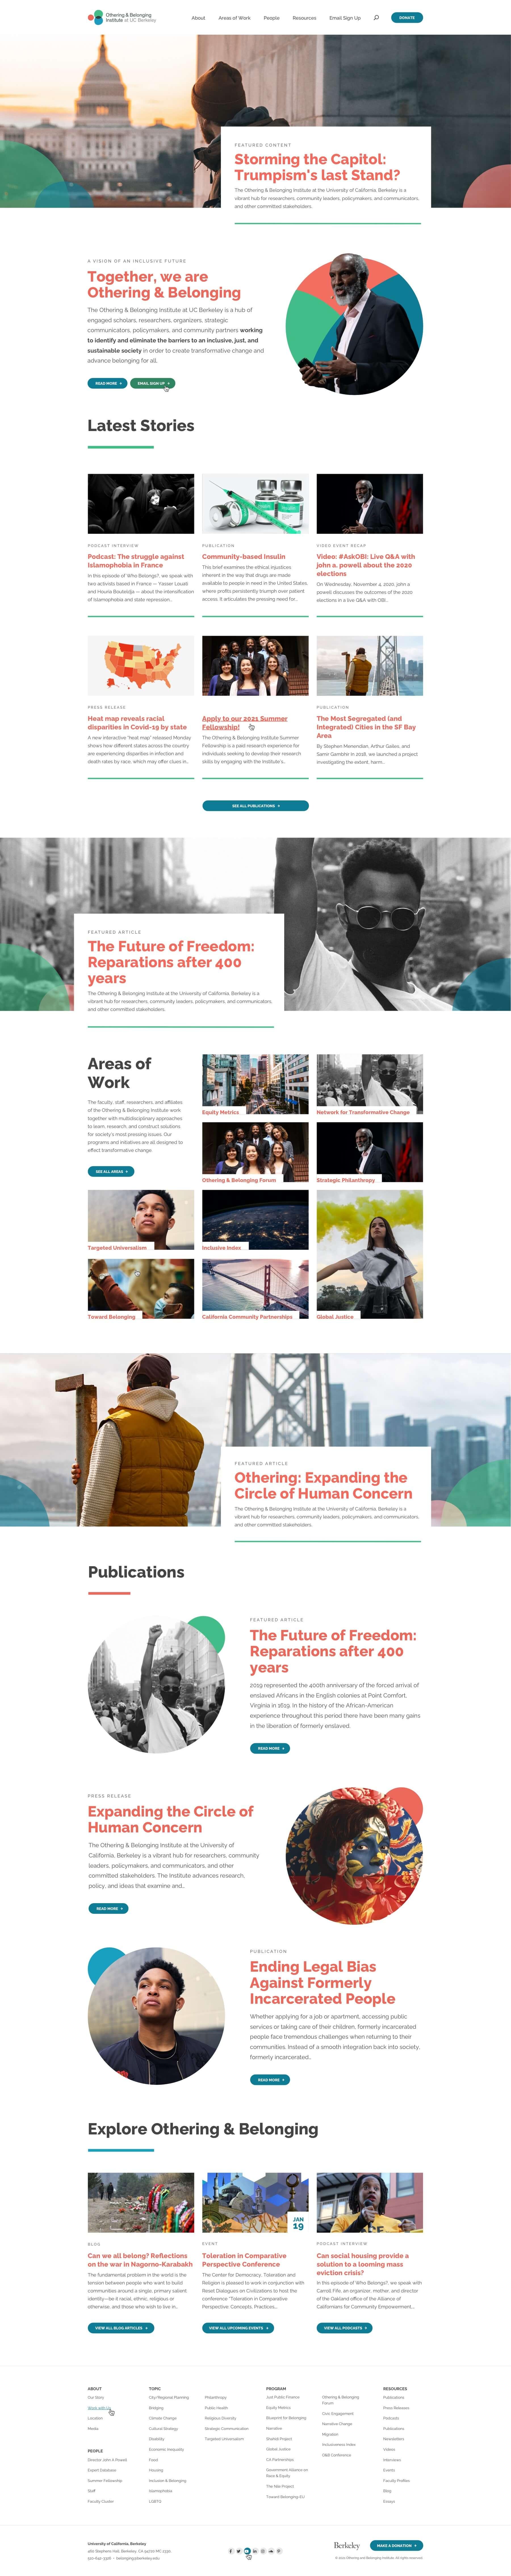 Homepage design for the Othering & Belonging Institute